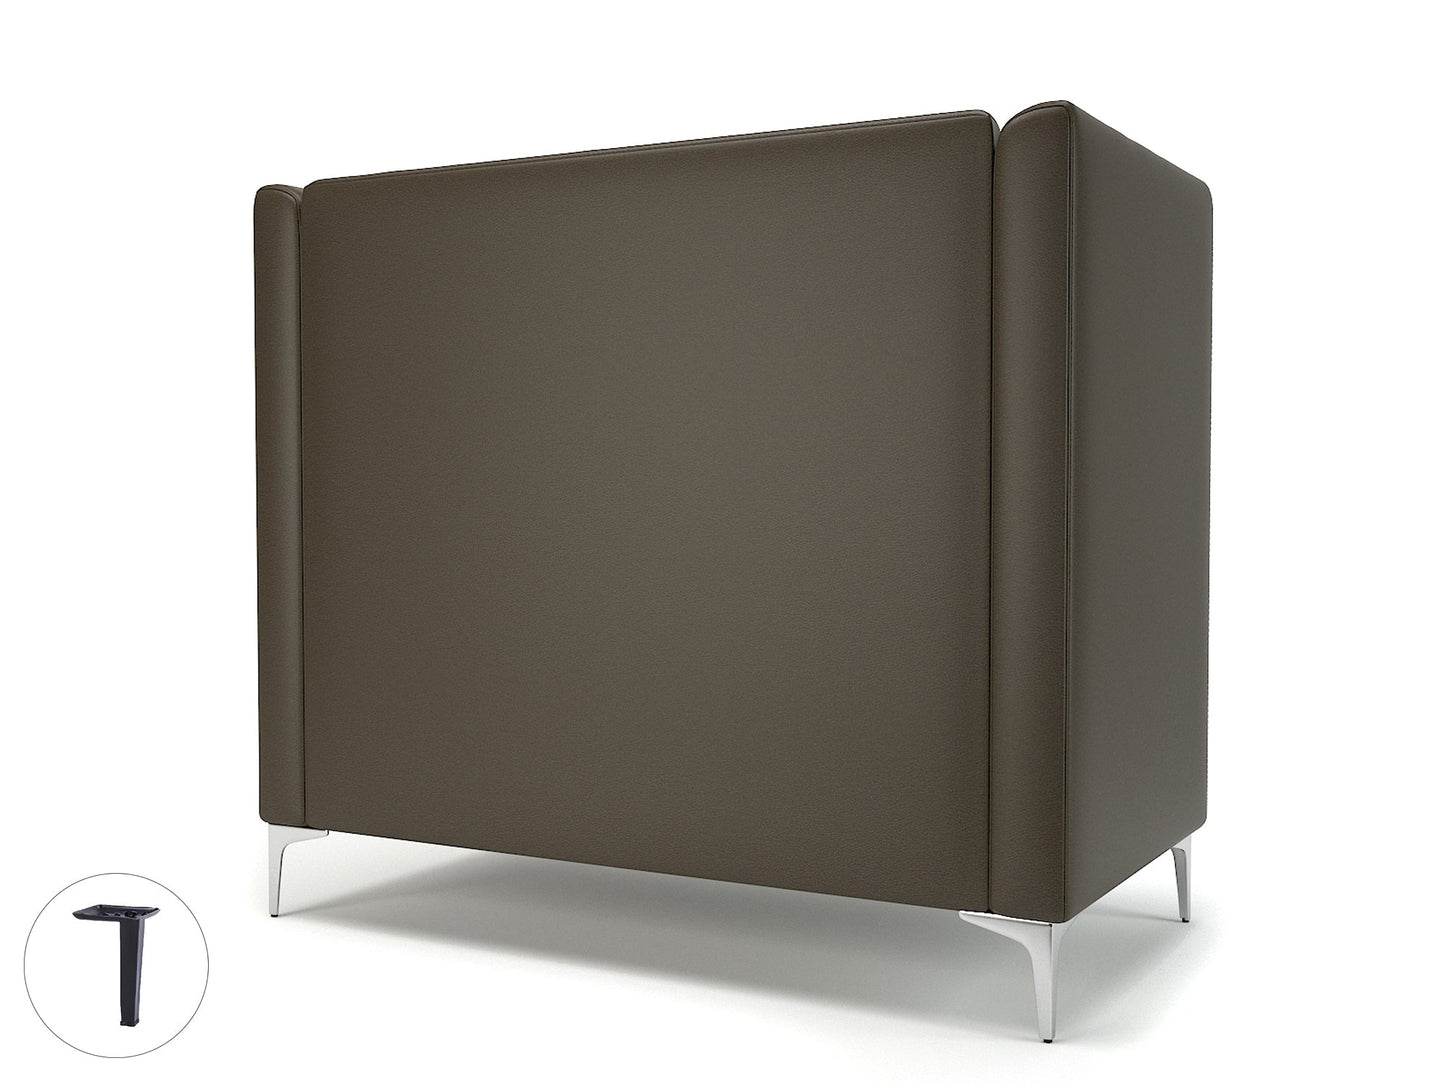 Altus 128cm Wide Privacy Booth in Cristina Marrone Ultima Faux Leather with Socket